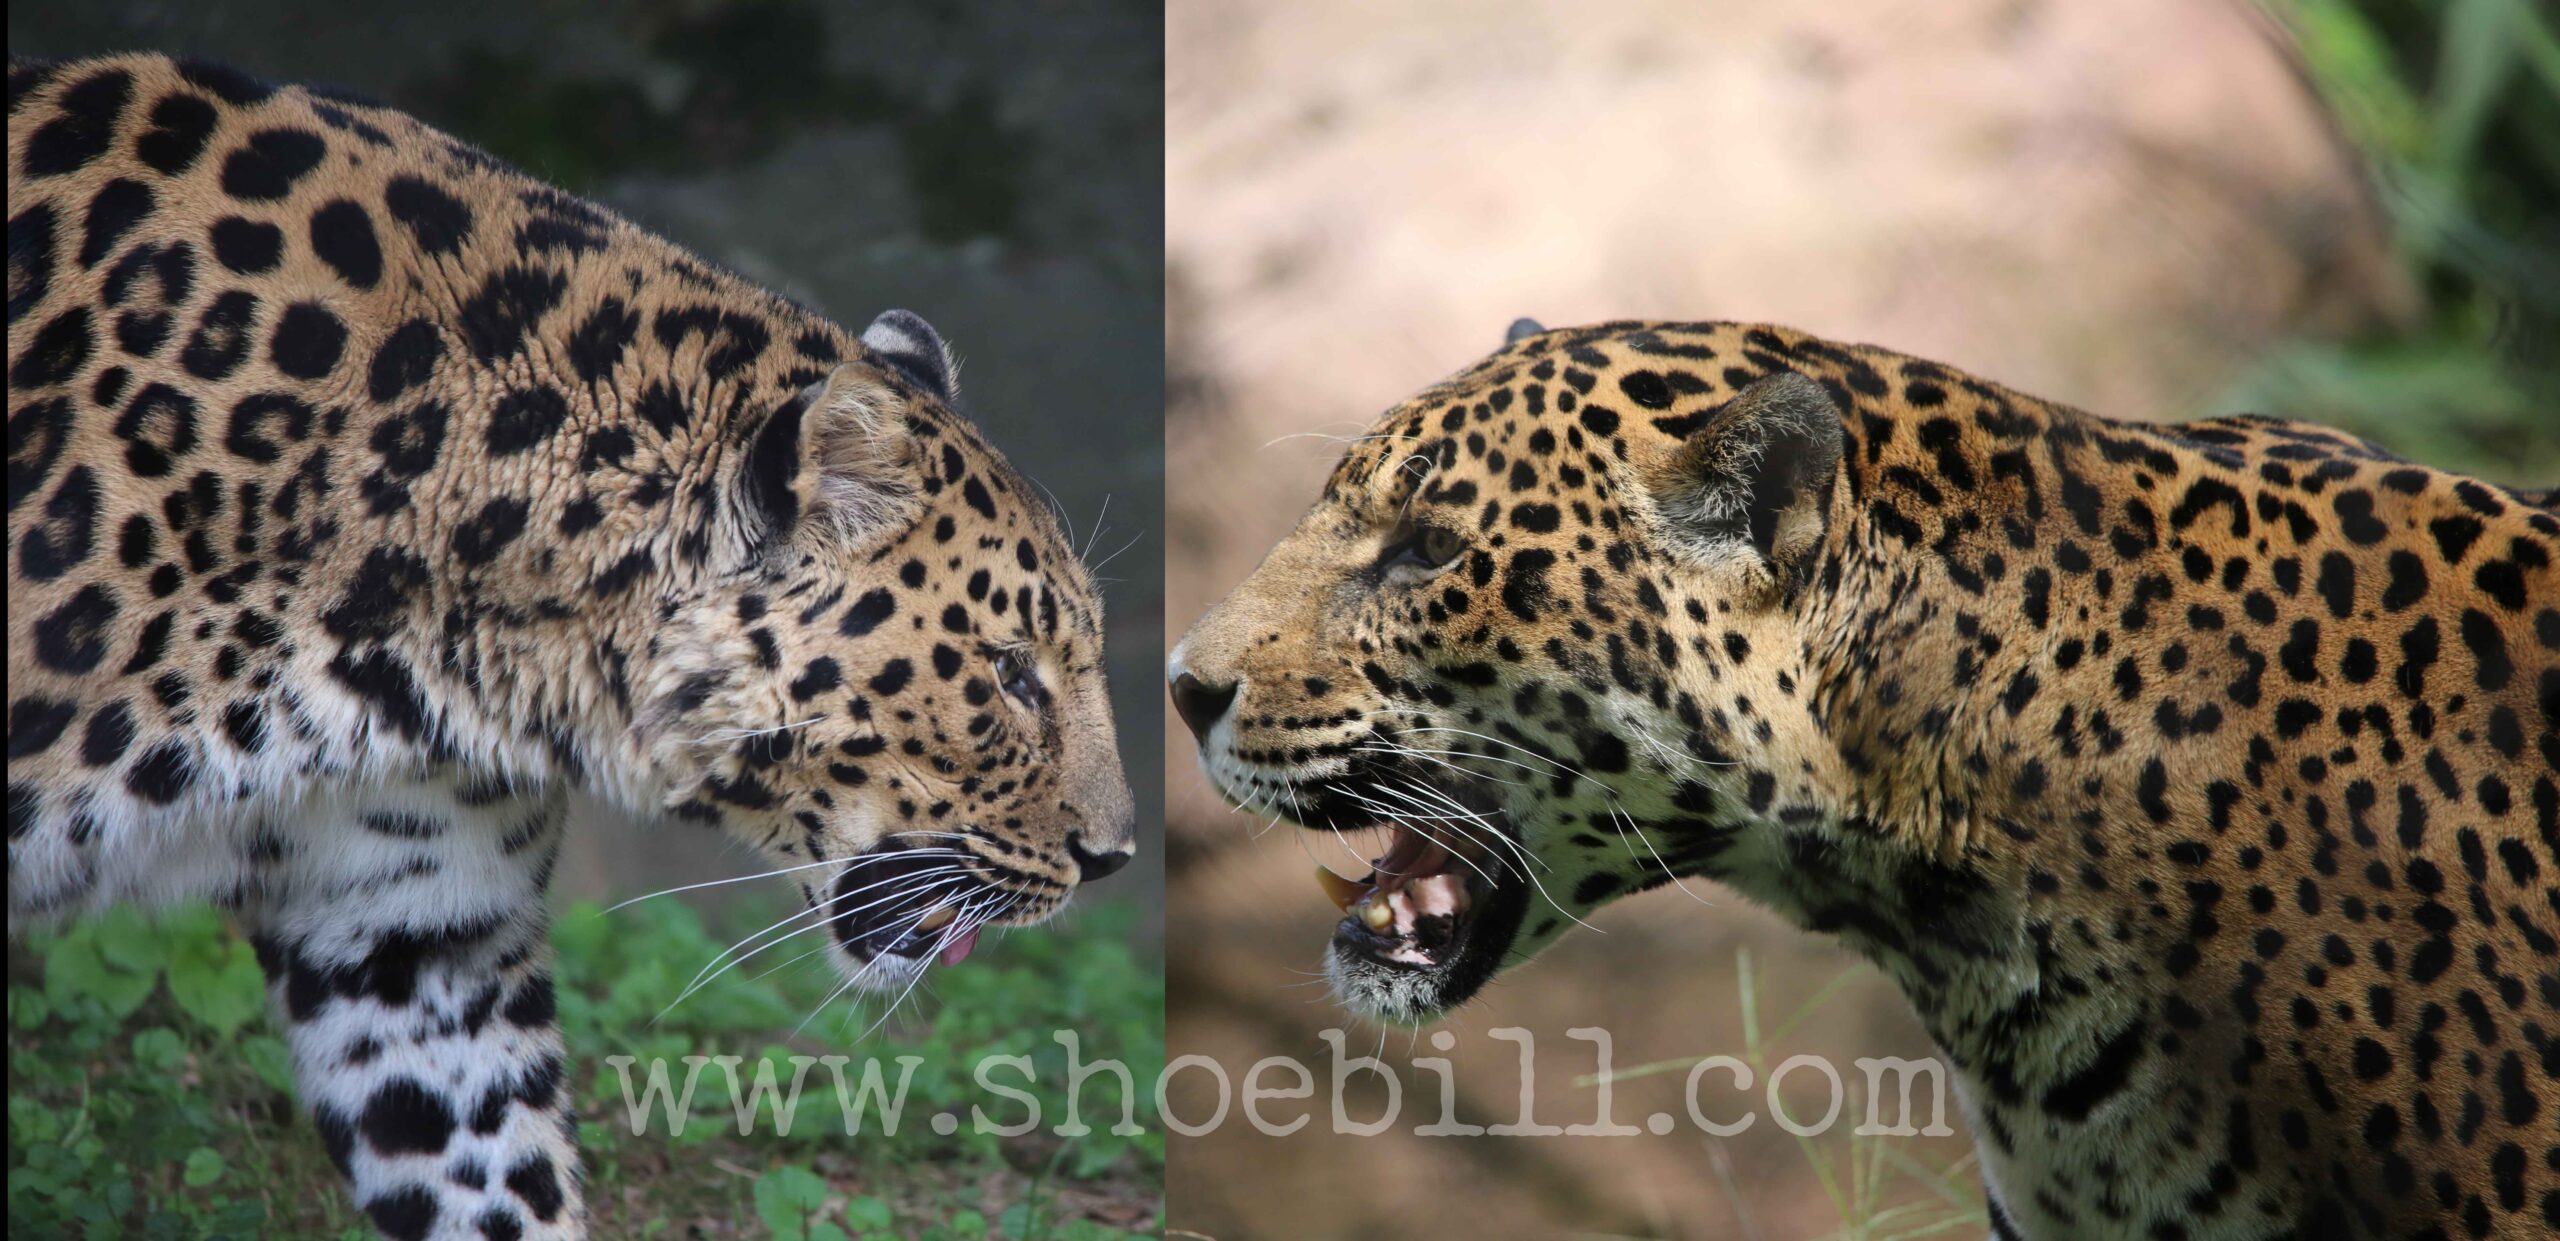 What Is The Difference Between a Jaguar and a Leopard?